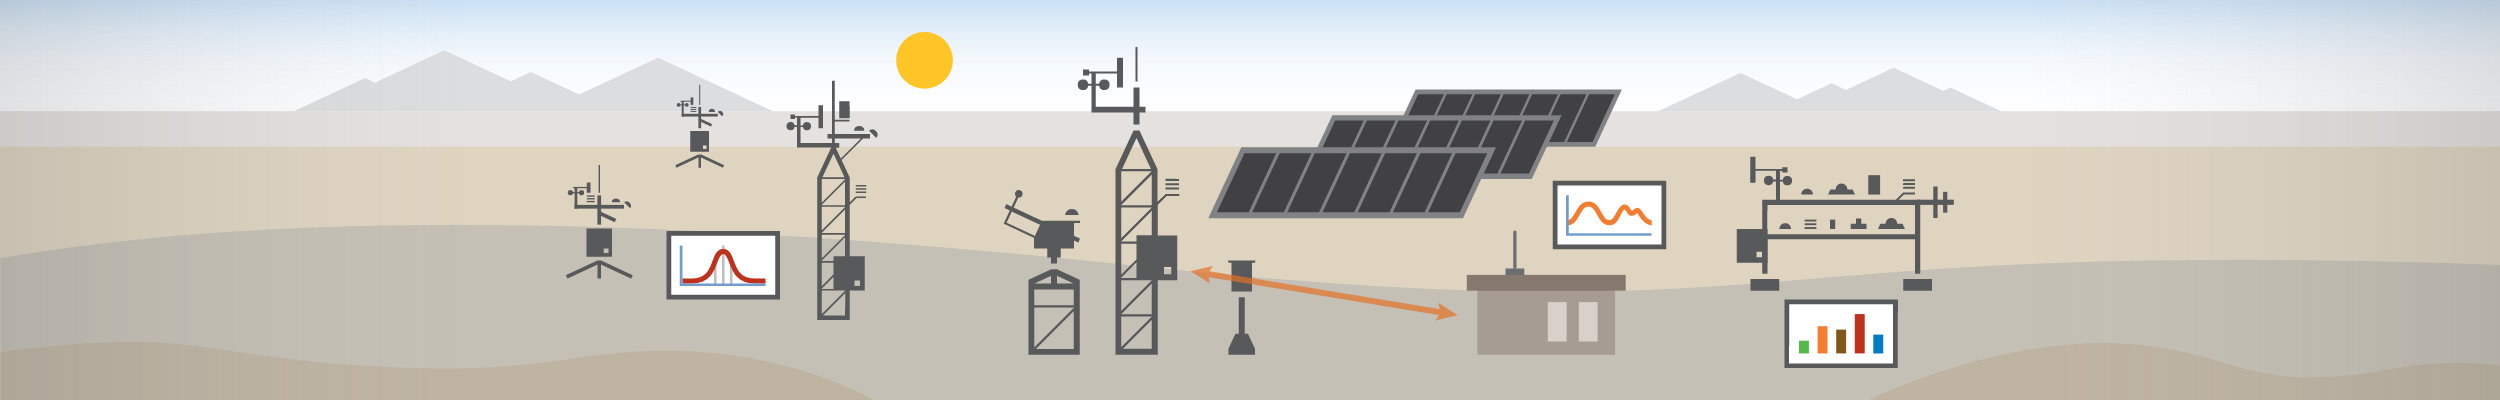 Solar Energy Systems for site assessment, performance monitoring, and advanced solar monitoring